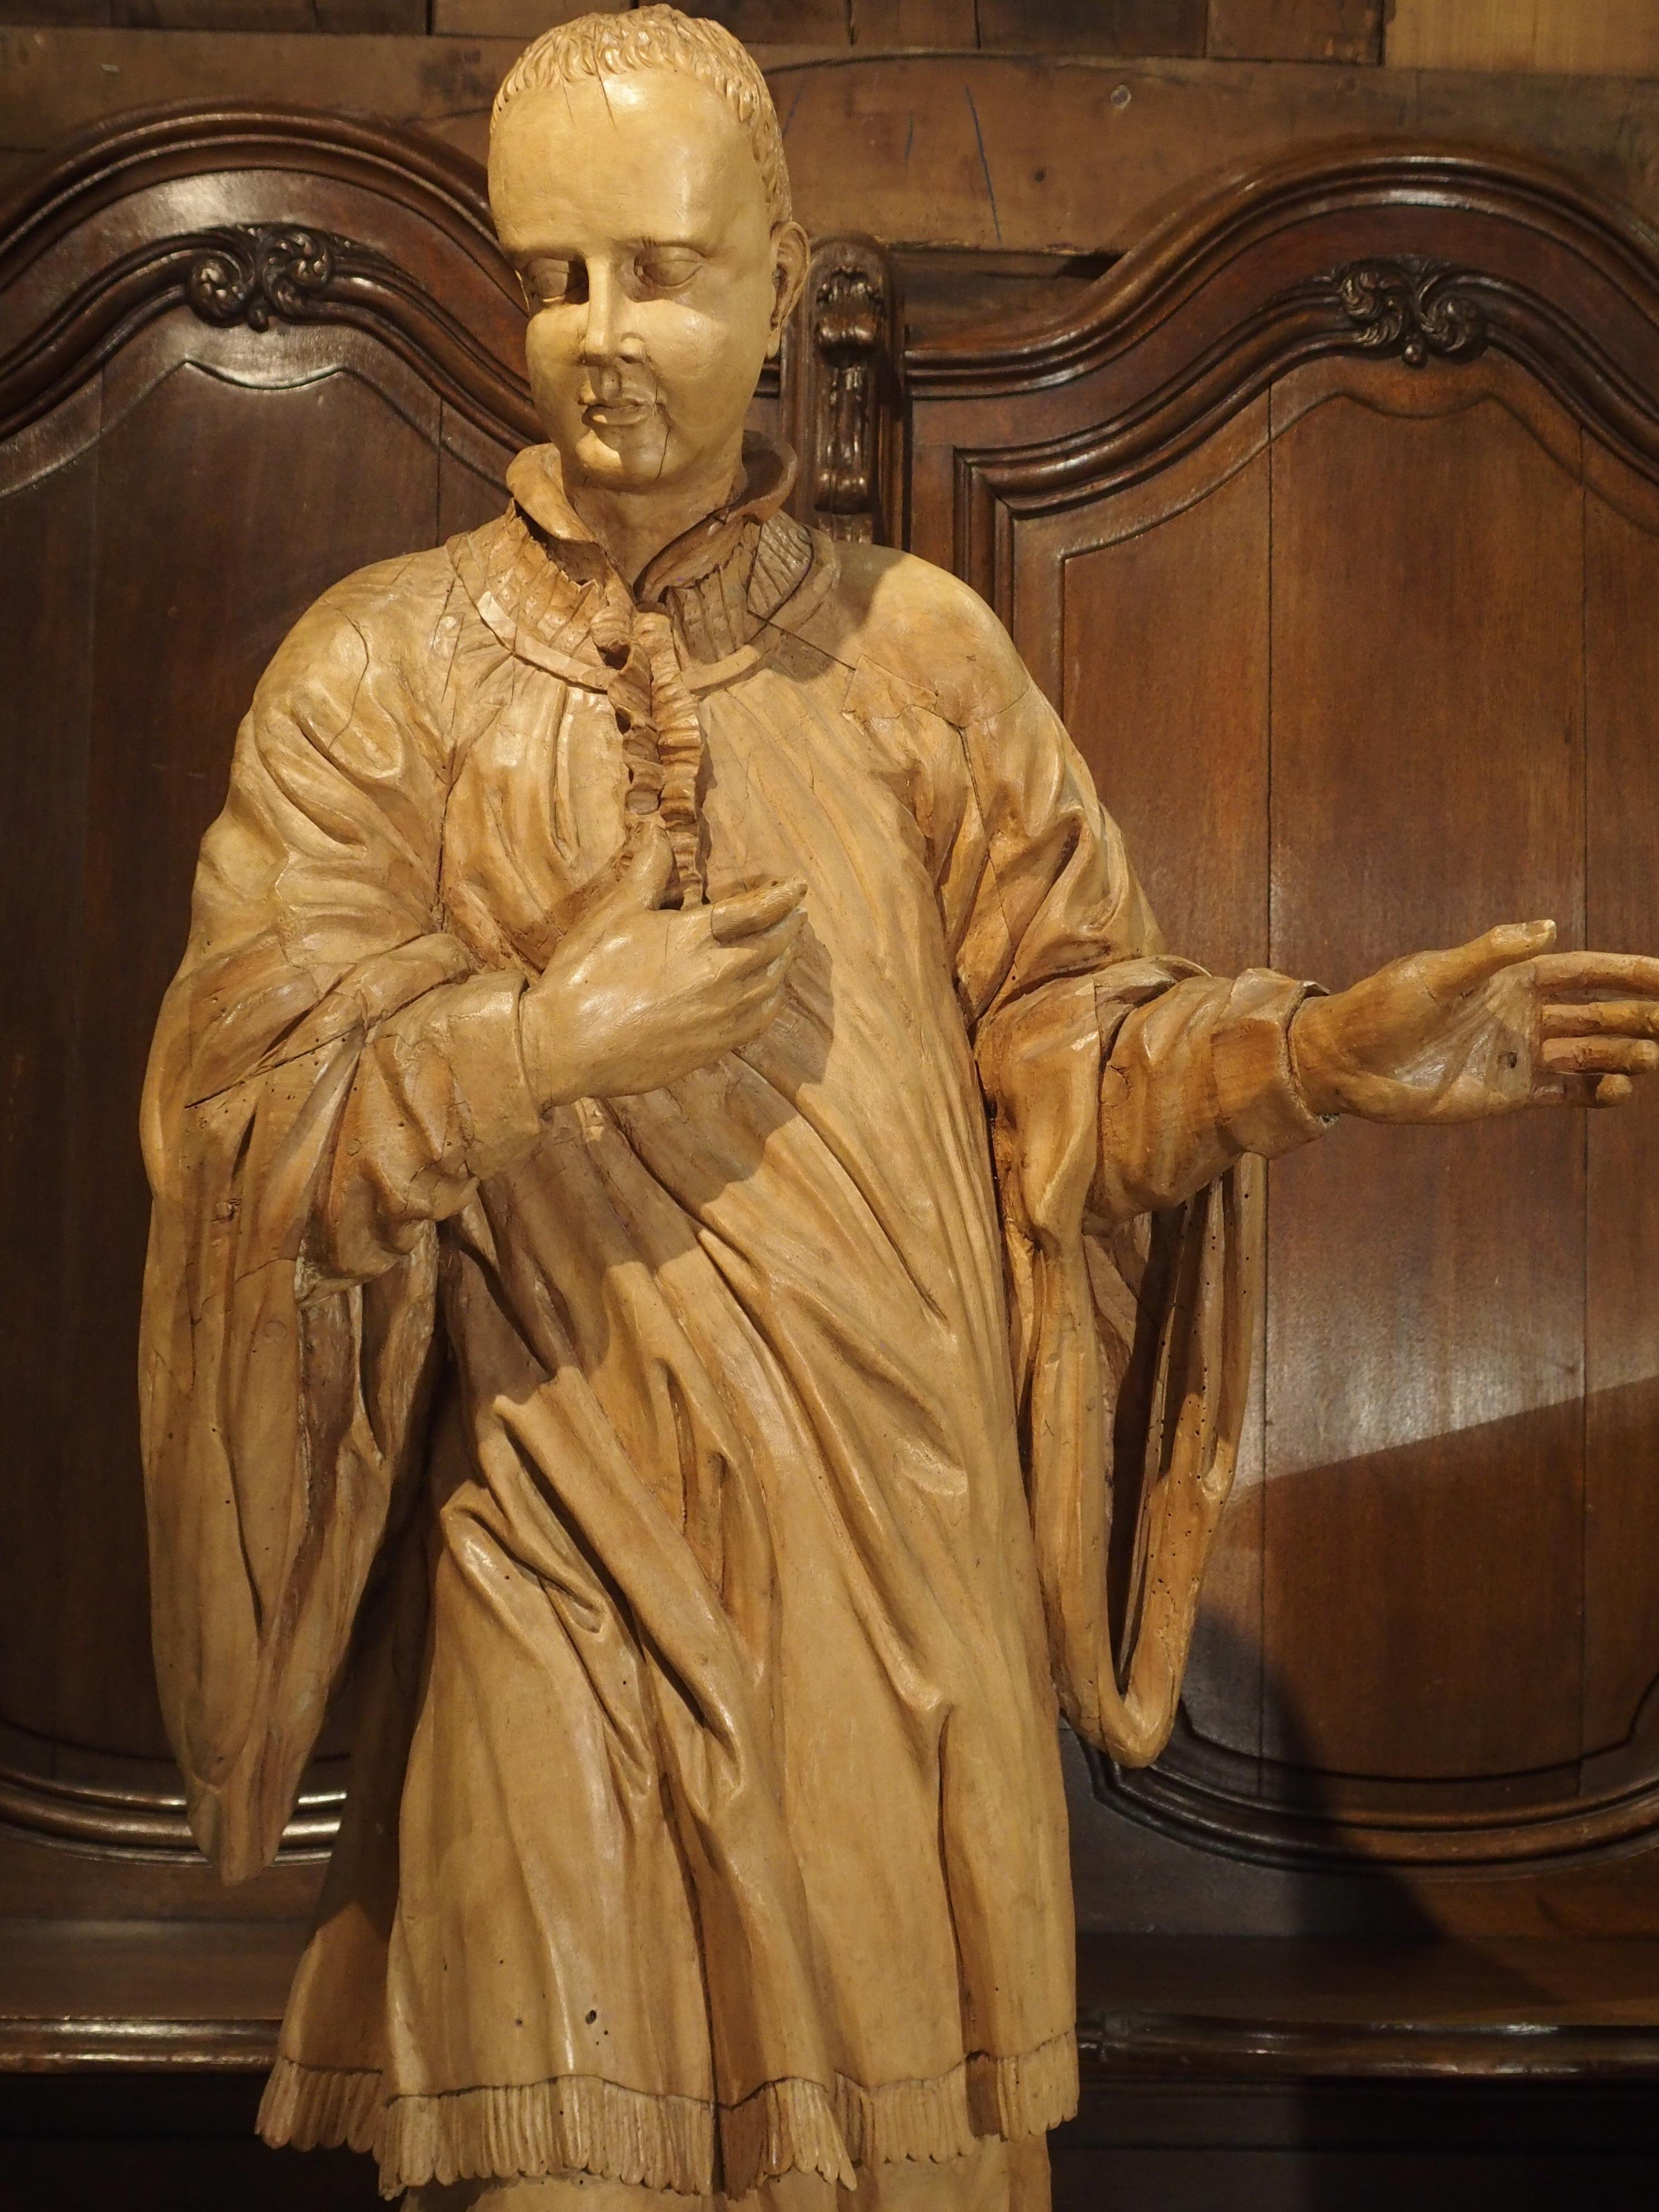 This beautifully hand carved, European limewood statue is of Saint Aloysius Gonzaga. The statue has incredible details, including his face, ears and in the many folds of his robe. The back is hollowed out and marked with black lettering of E S B and